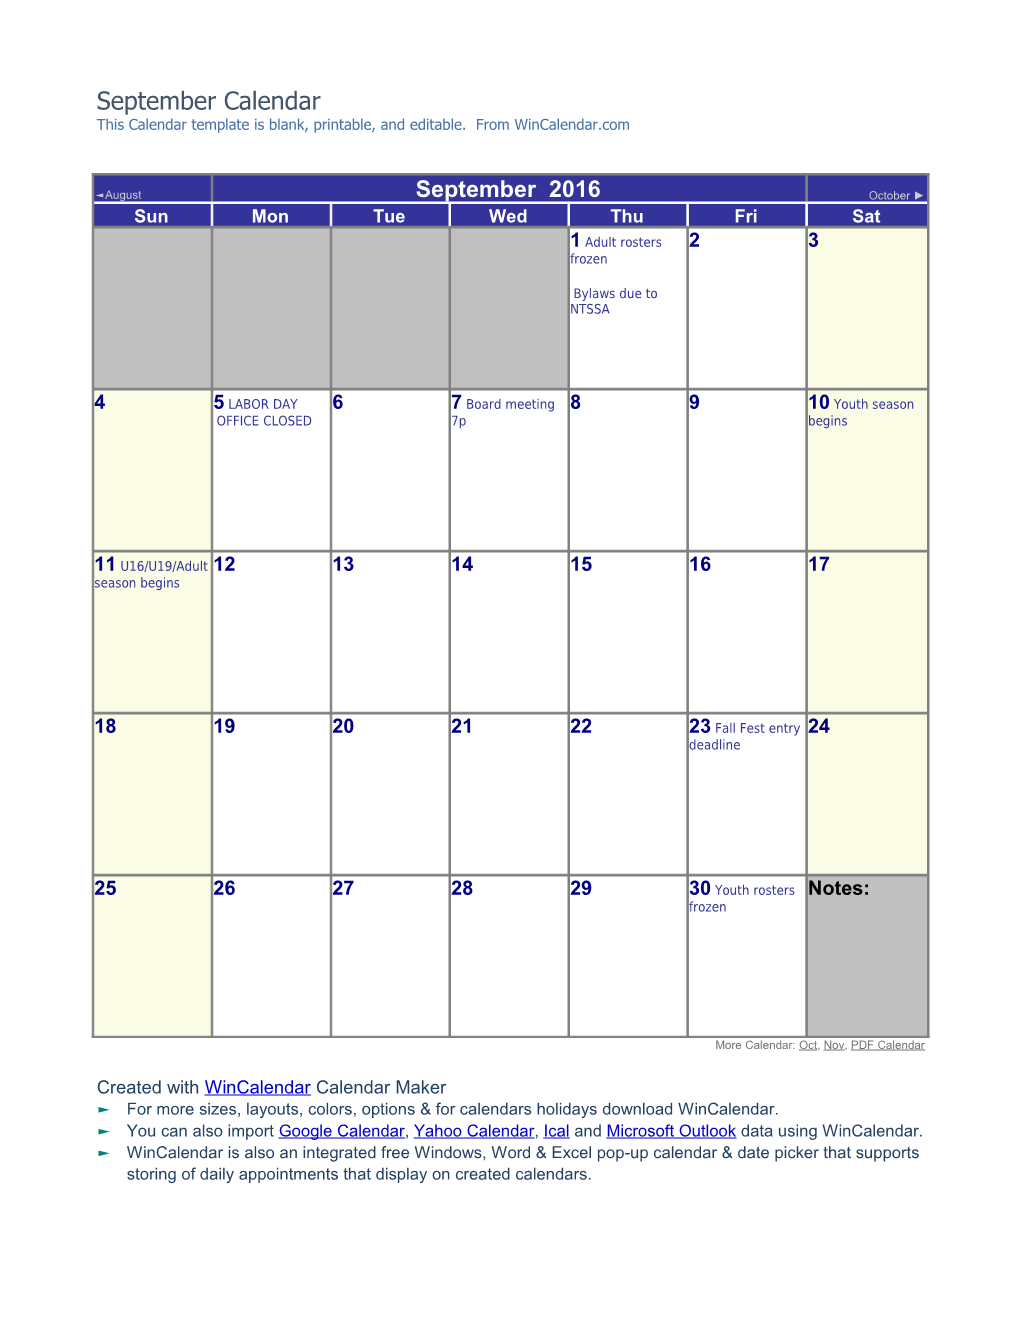 September Calendar This Calendar Template Is Blank, Printable, and Editable. From